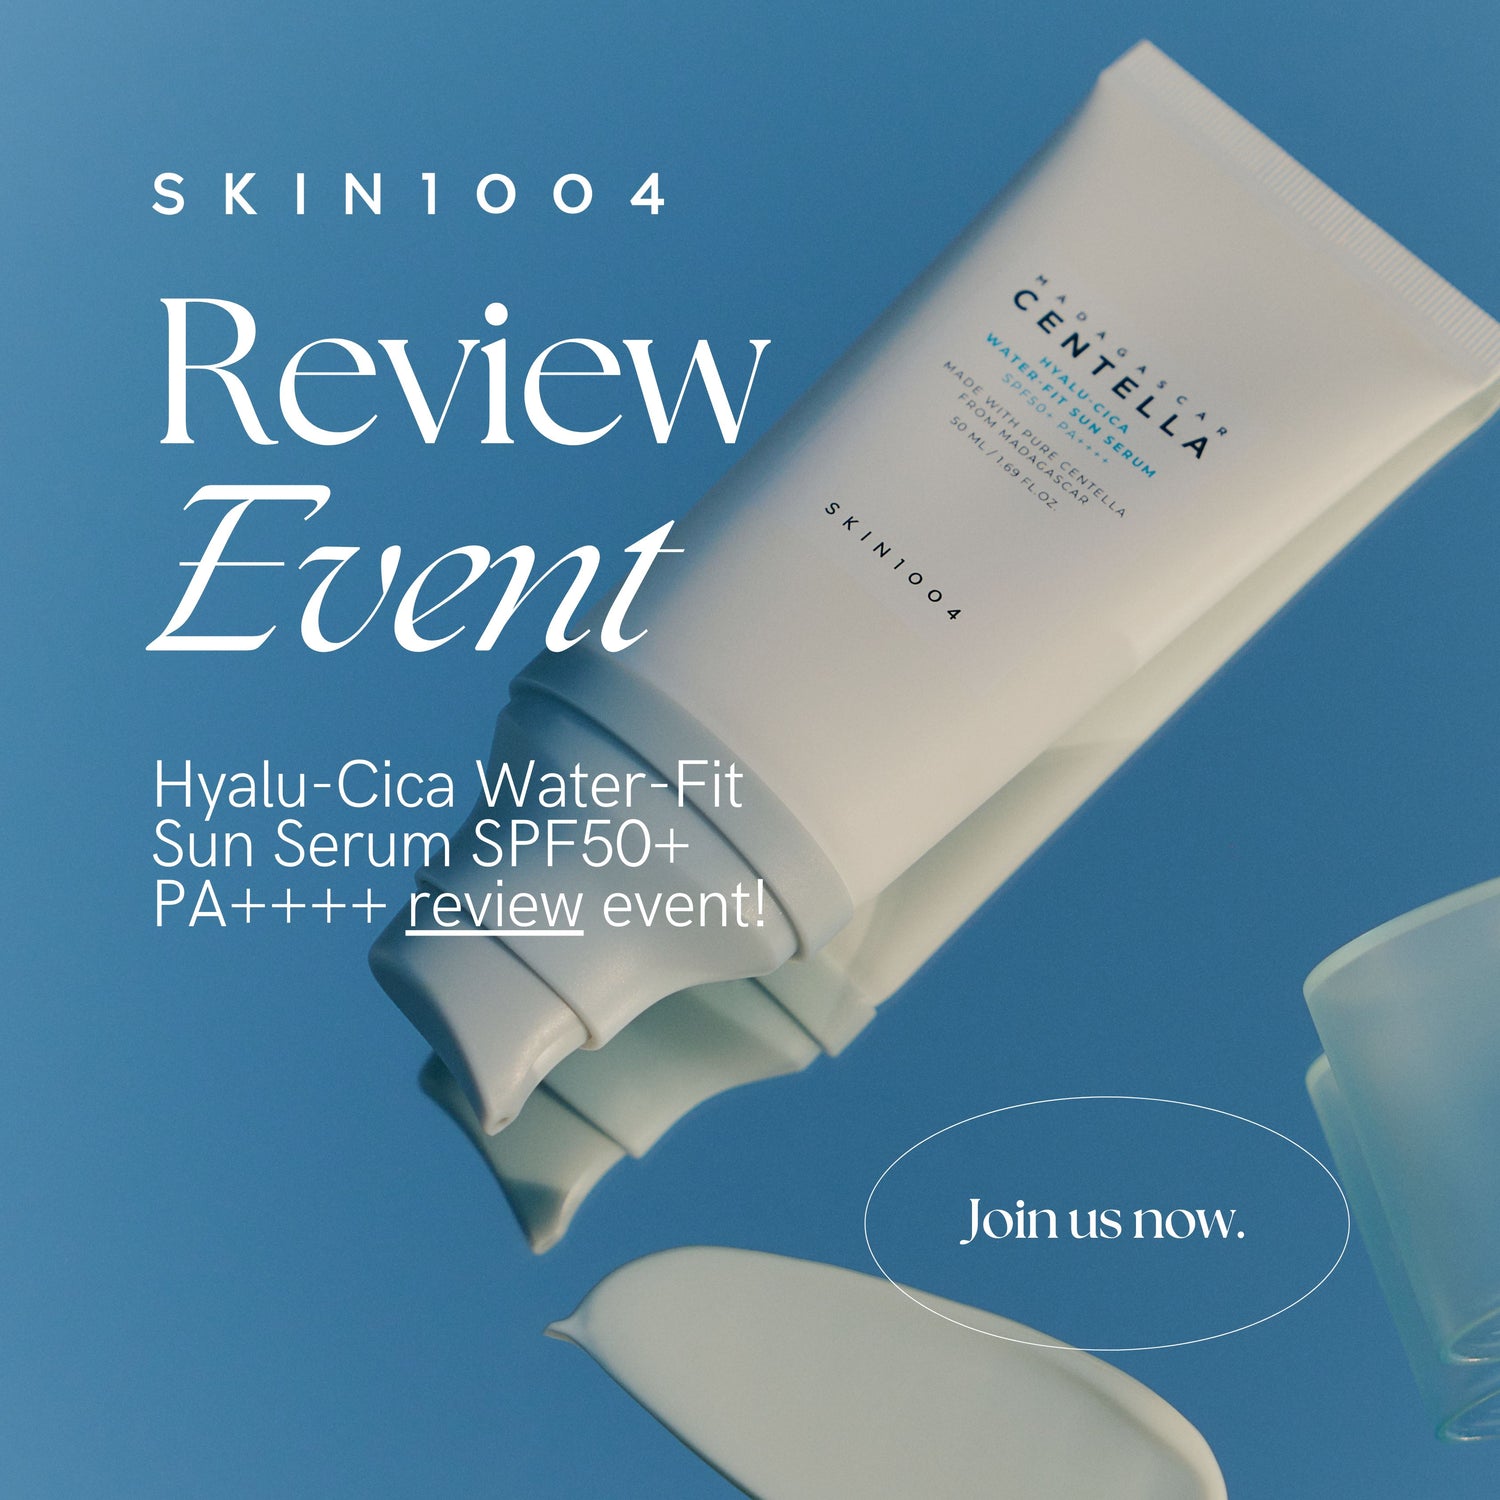 SKIN1004 Hyalu-Cica Water-Fit Sun Serum SPF50+ PA++++ IG review event